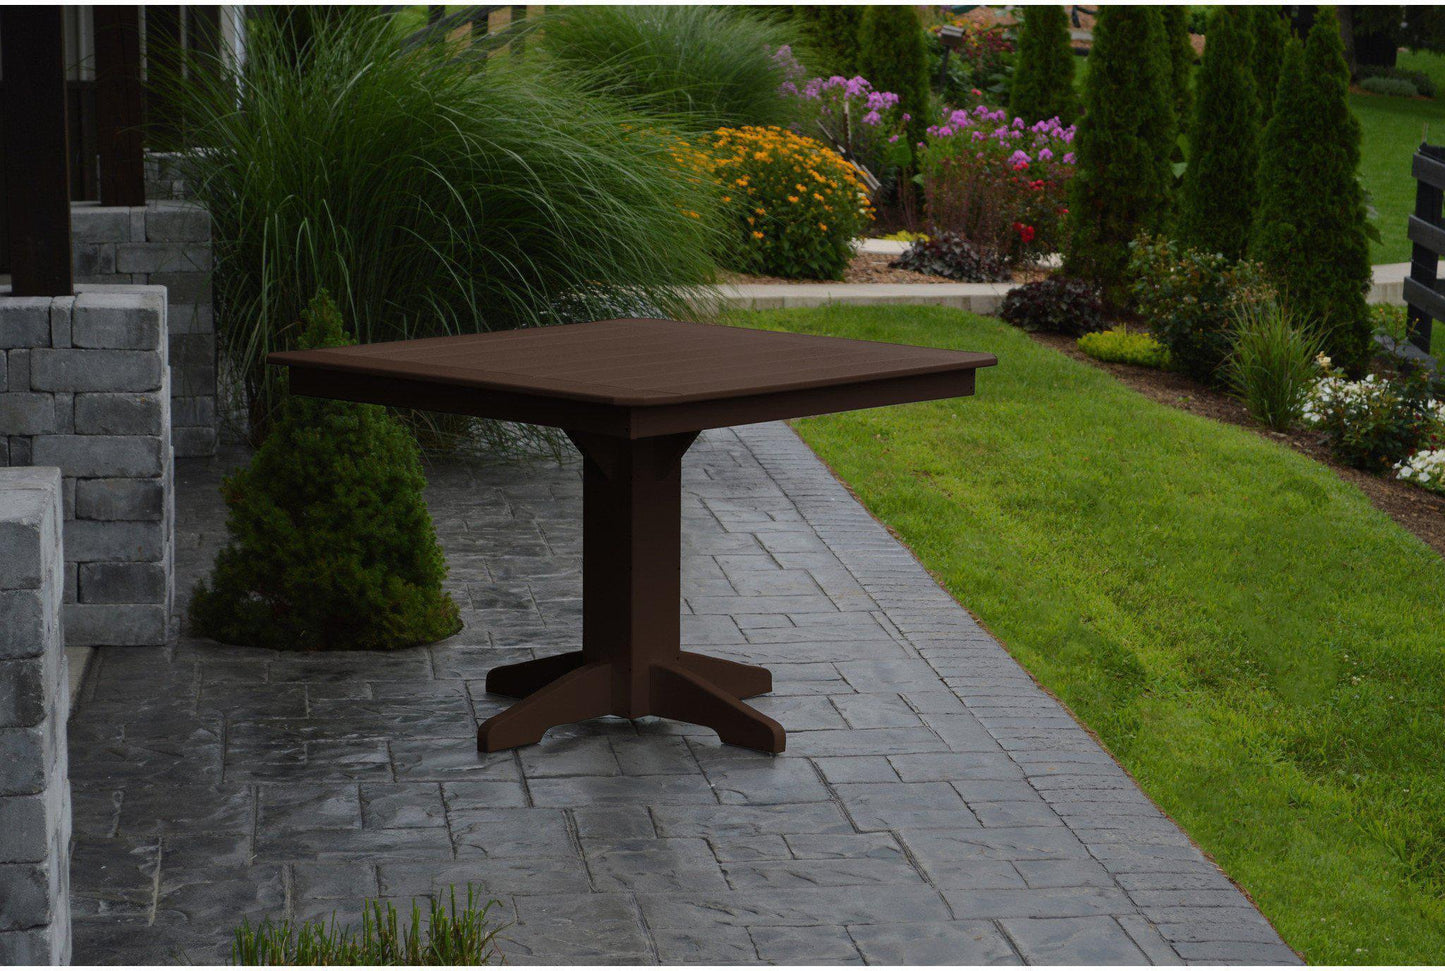 A&L Furniture Recycled Plastic 44" Square Dining Table - Tudor Brown